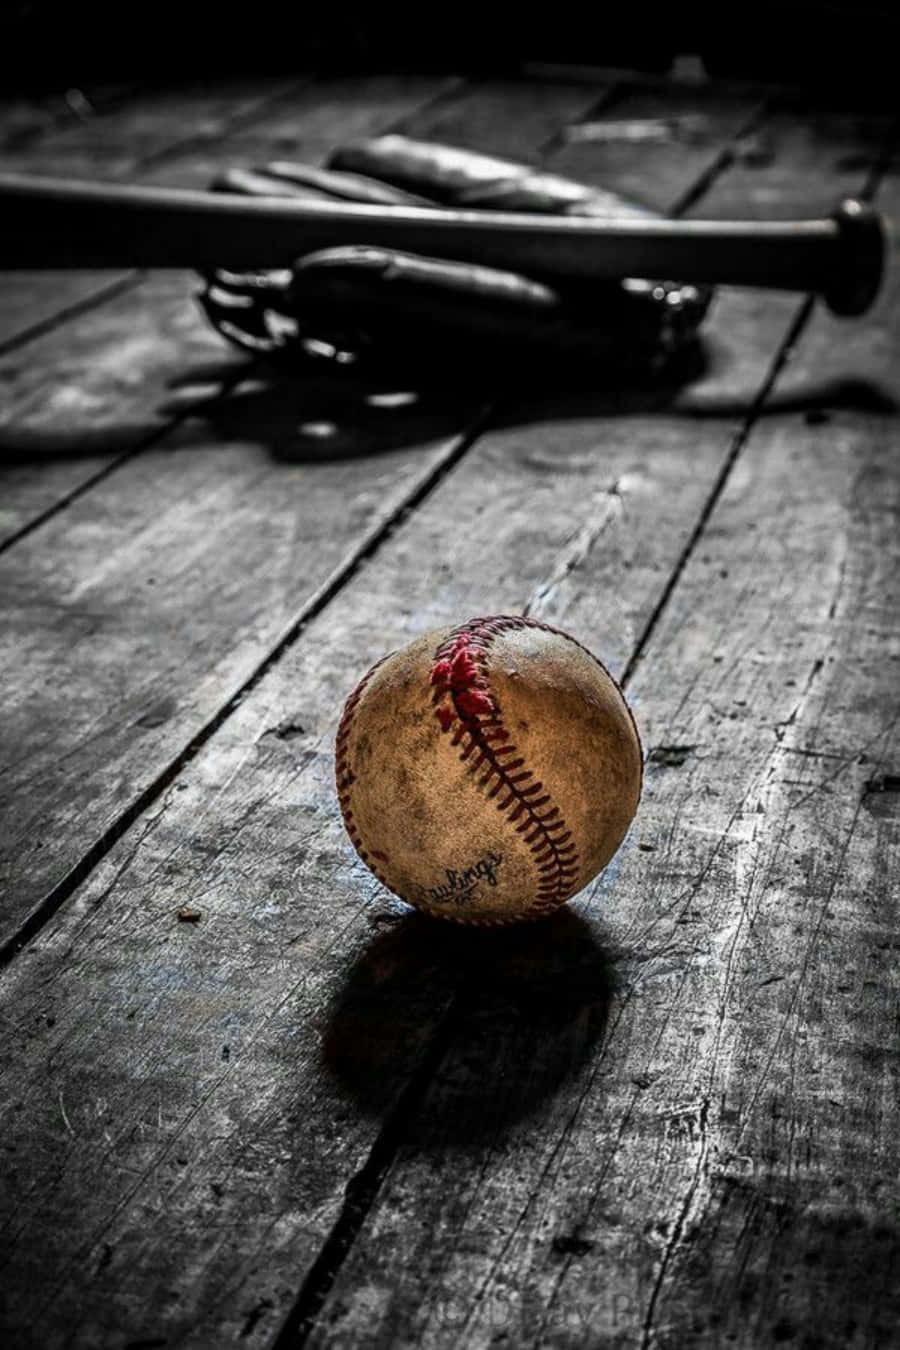 Captivating Strike: A Baseball Player in Action